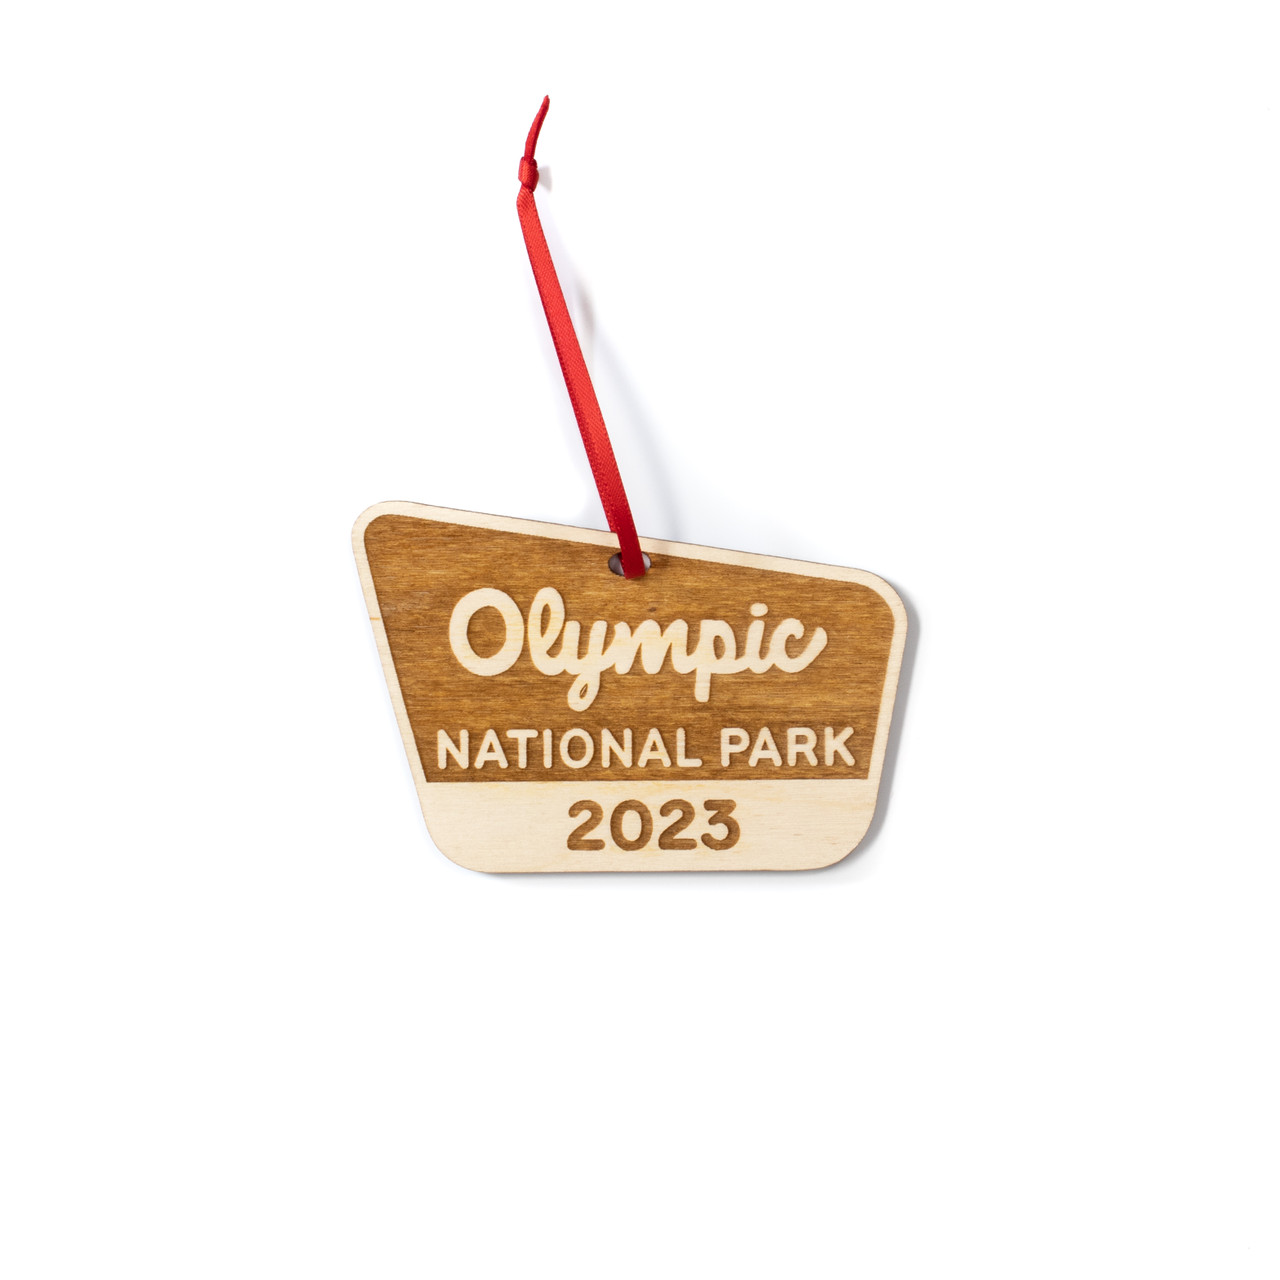 A charming engraved wooden ornament of Olympic National Park: A perfect souvenir to remember the stunning landscapes and natural beauty of the park.